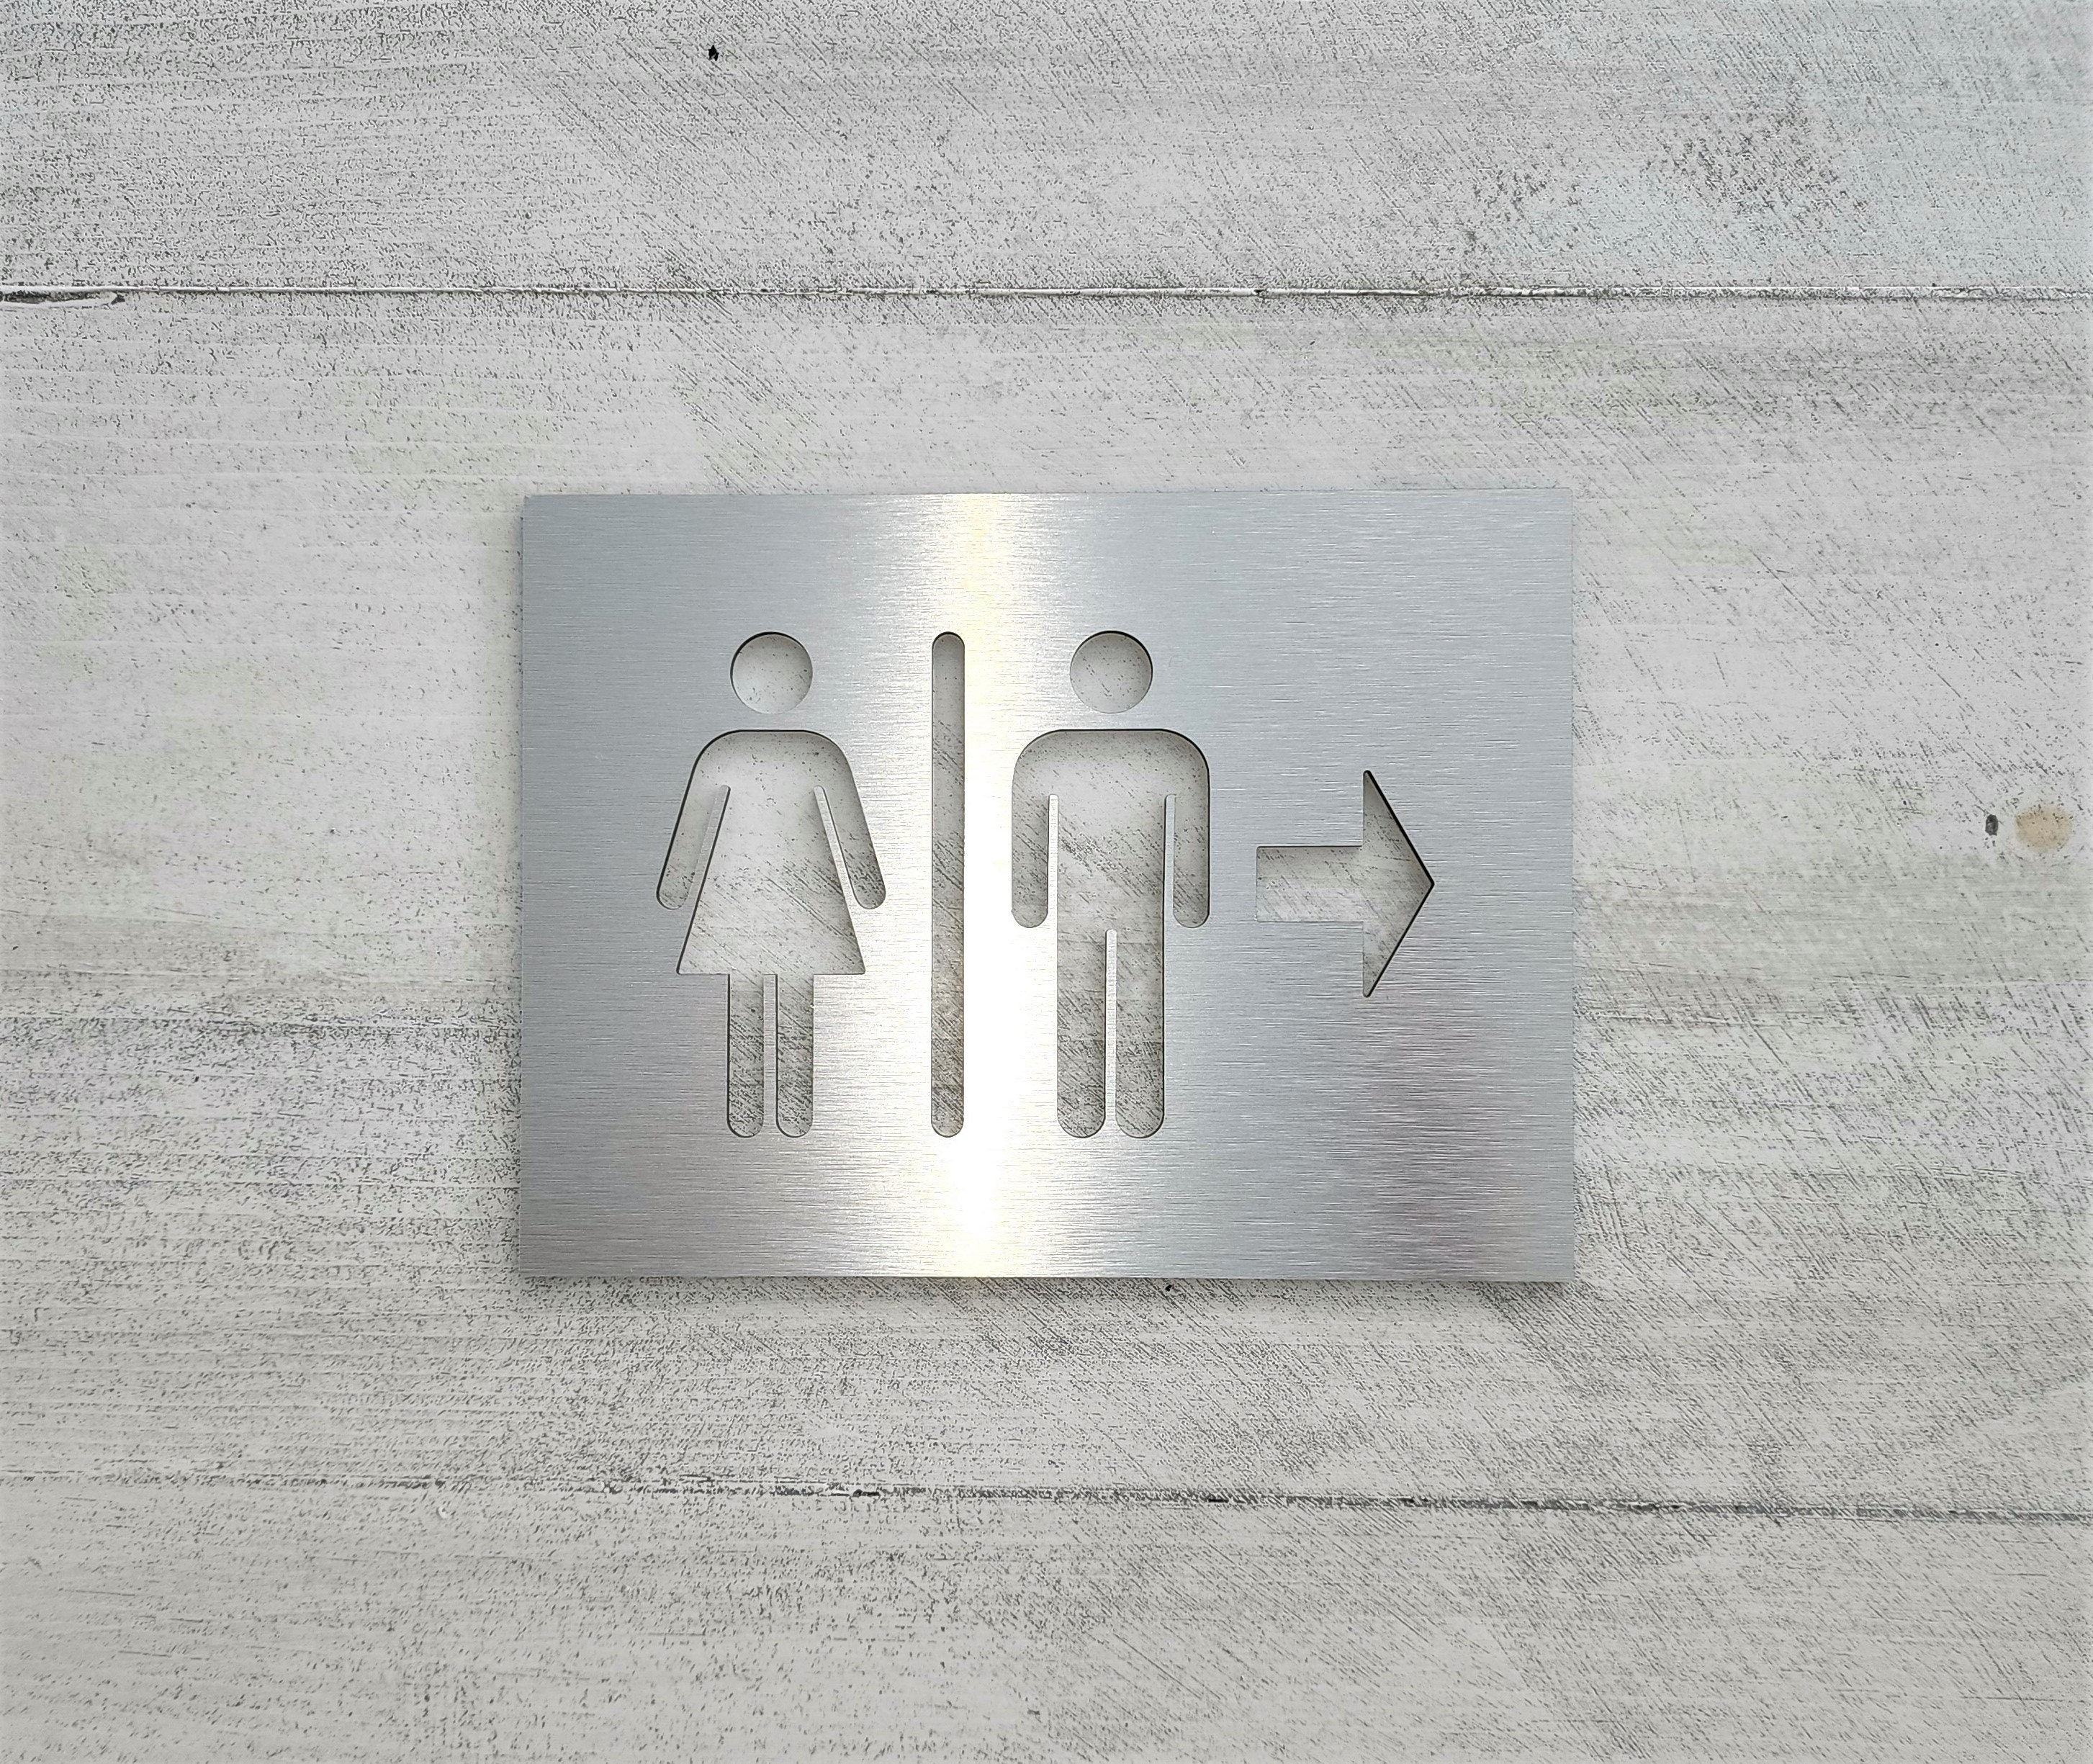 OFFICE COMMERCIAL GLASS ACRYLIC TOILET SIGN MODERN SHOWER ROOM SIGN PLAQUE 